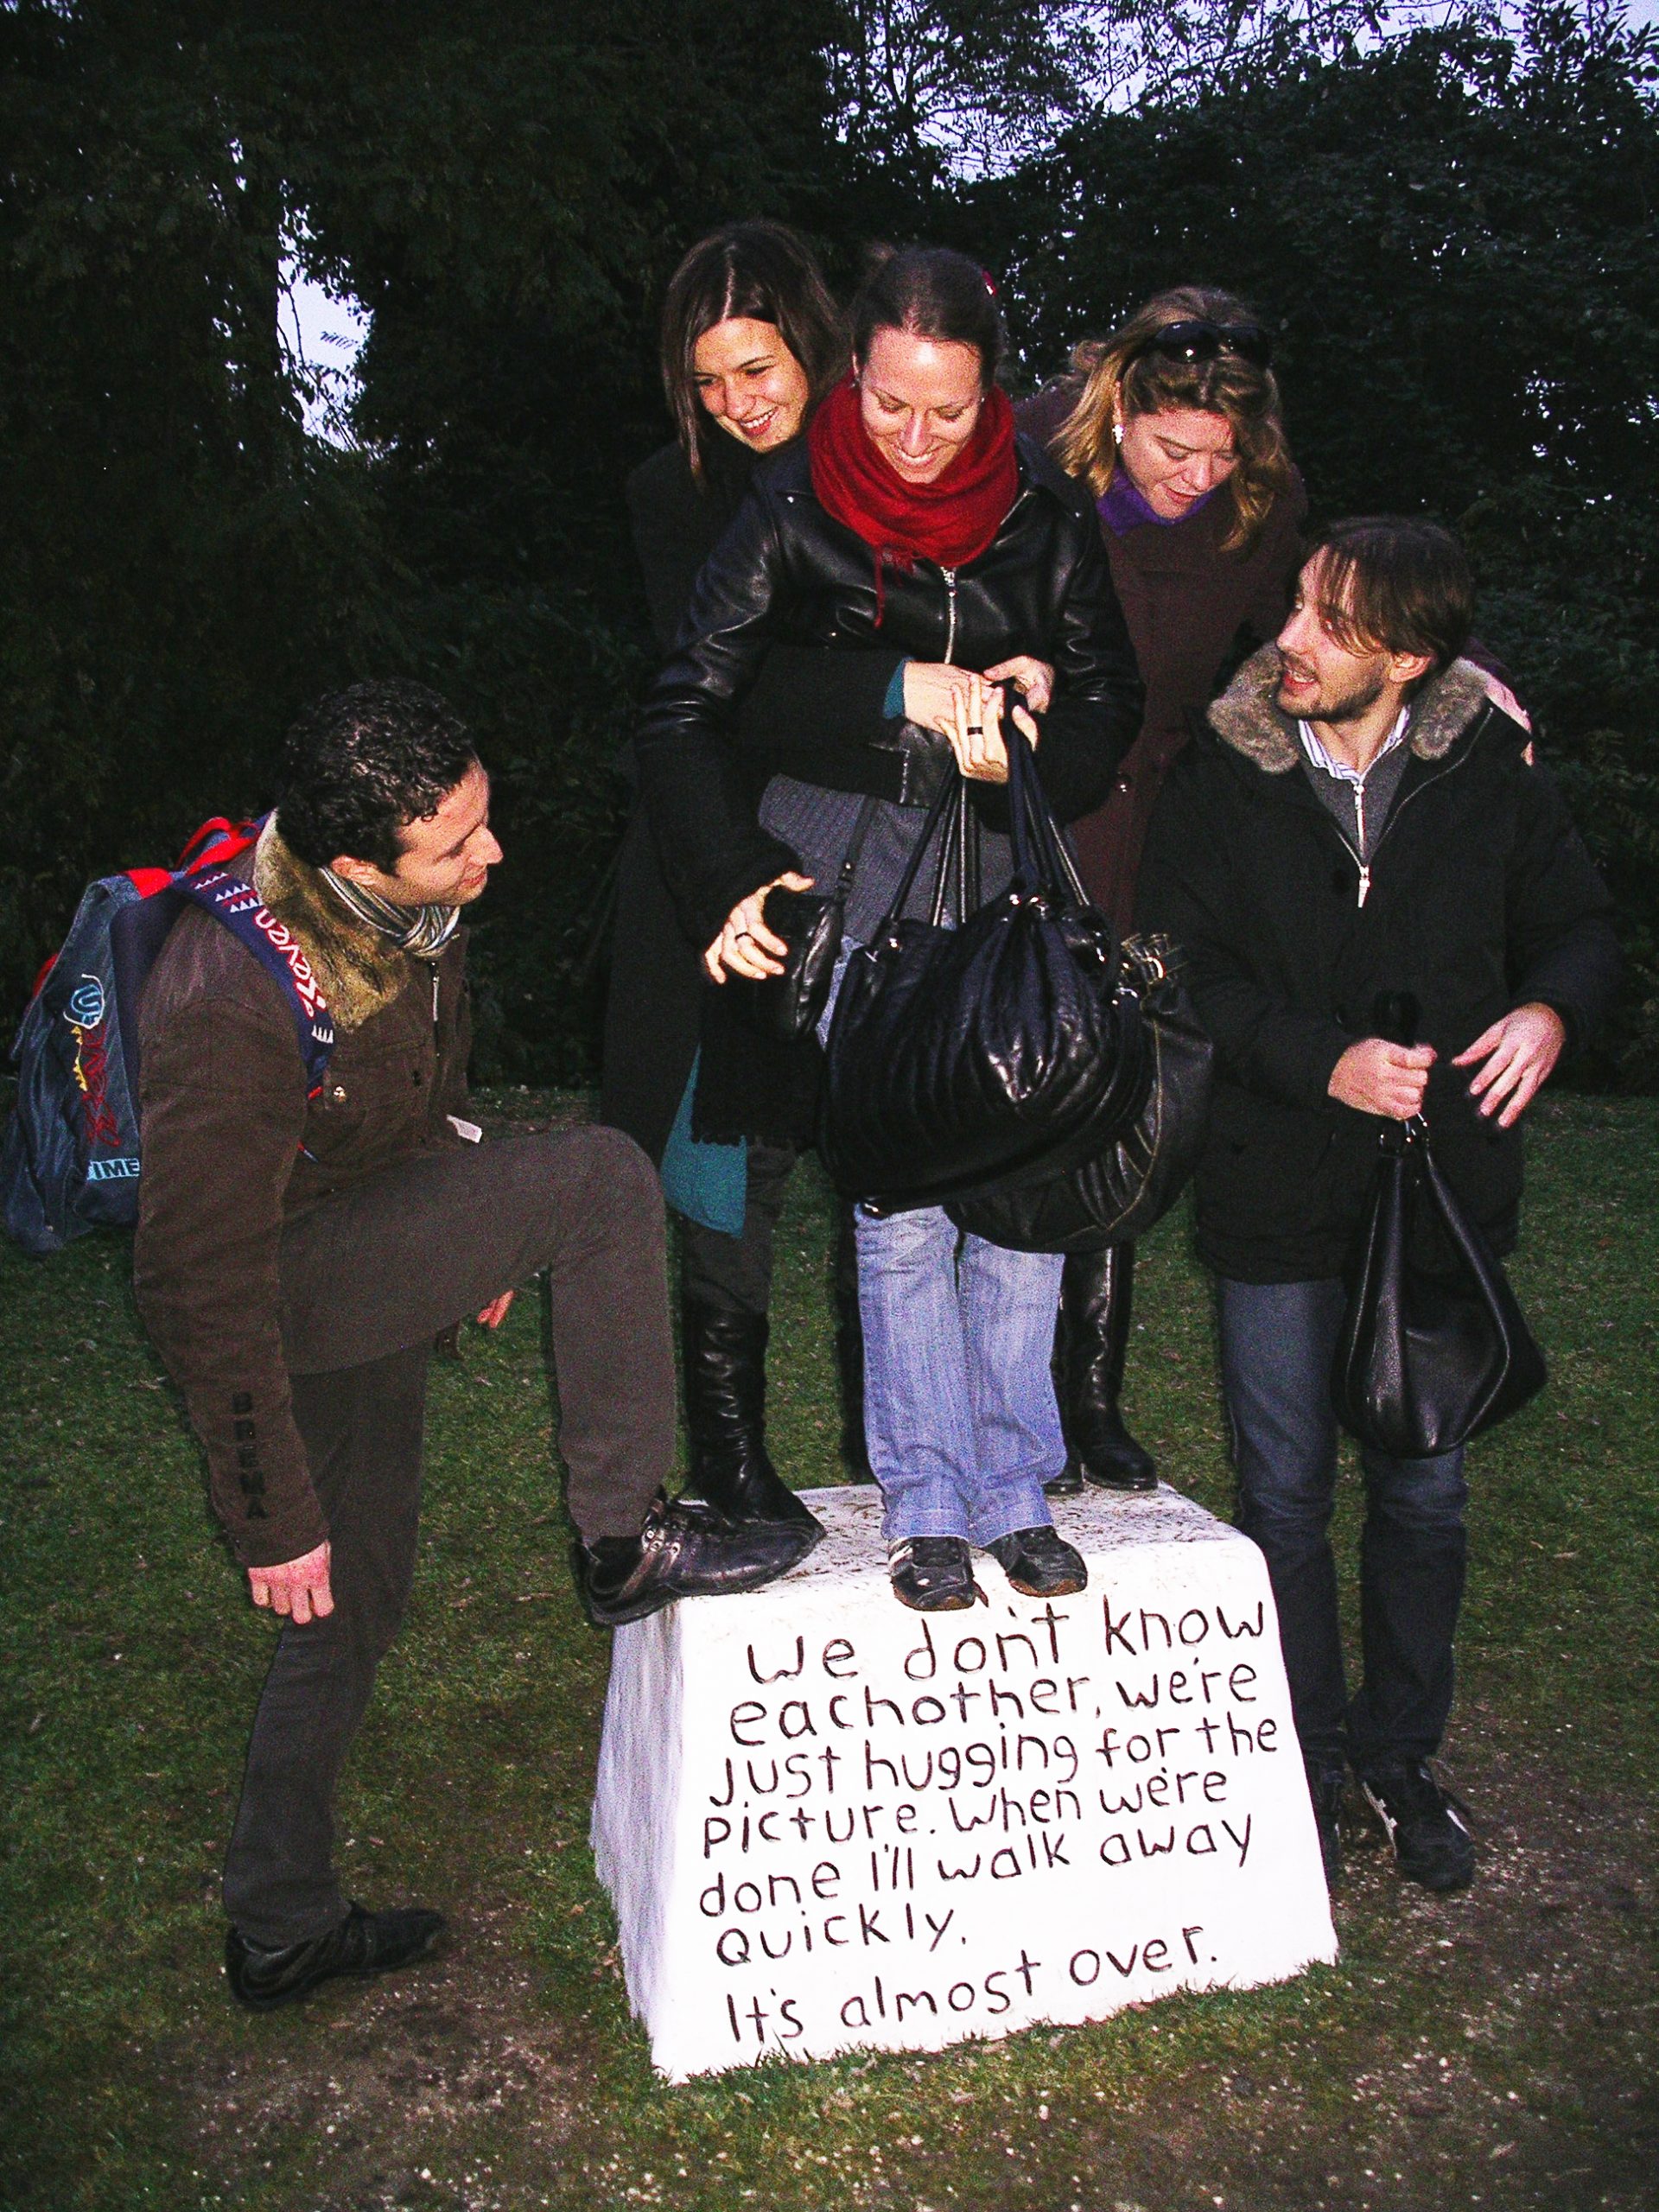 Five people attempting to stand on a pedestal inscribed with words.